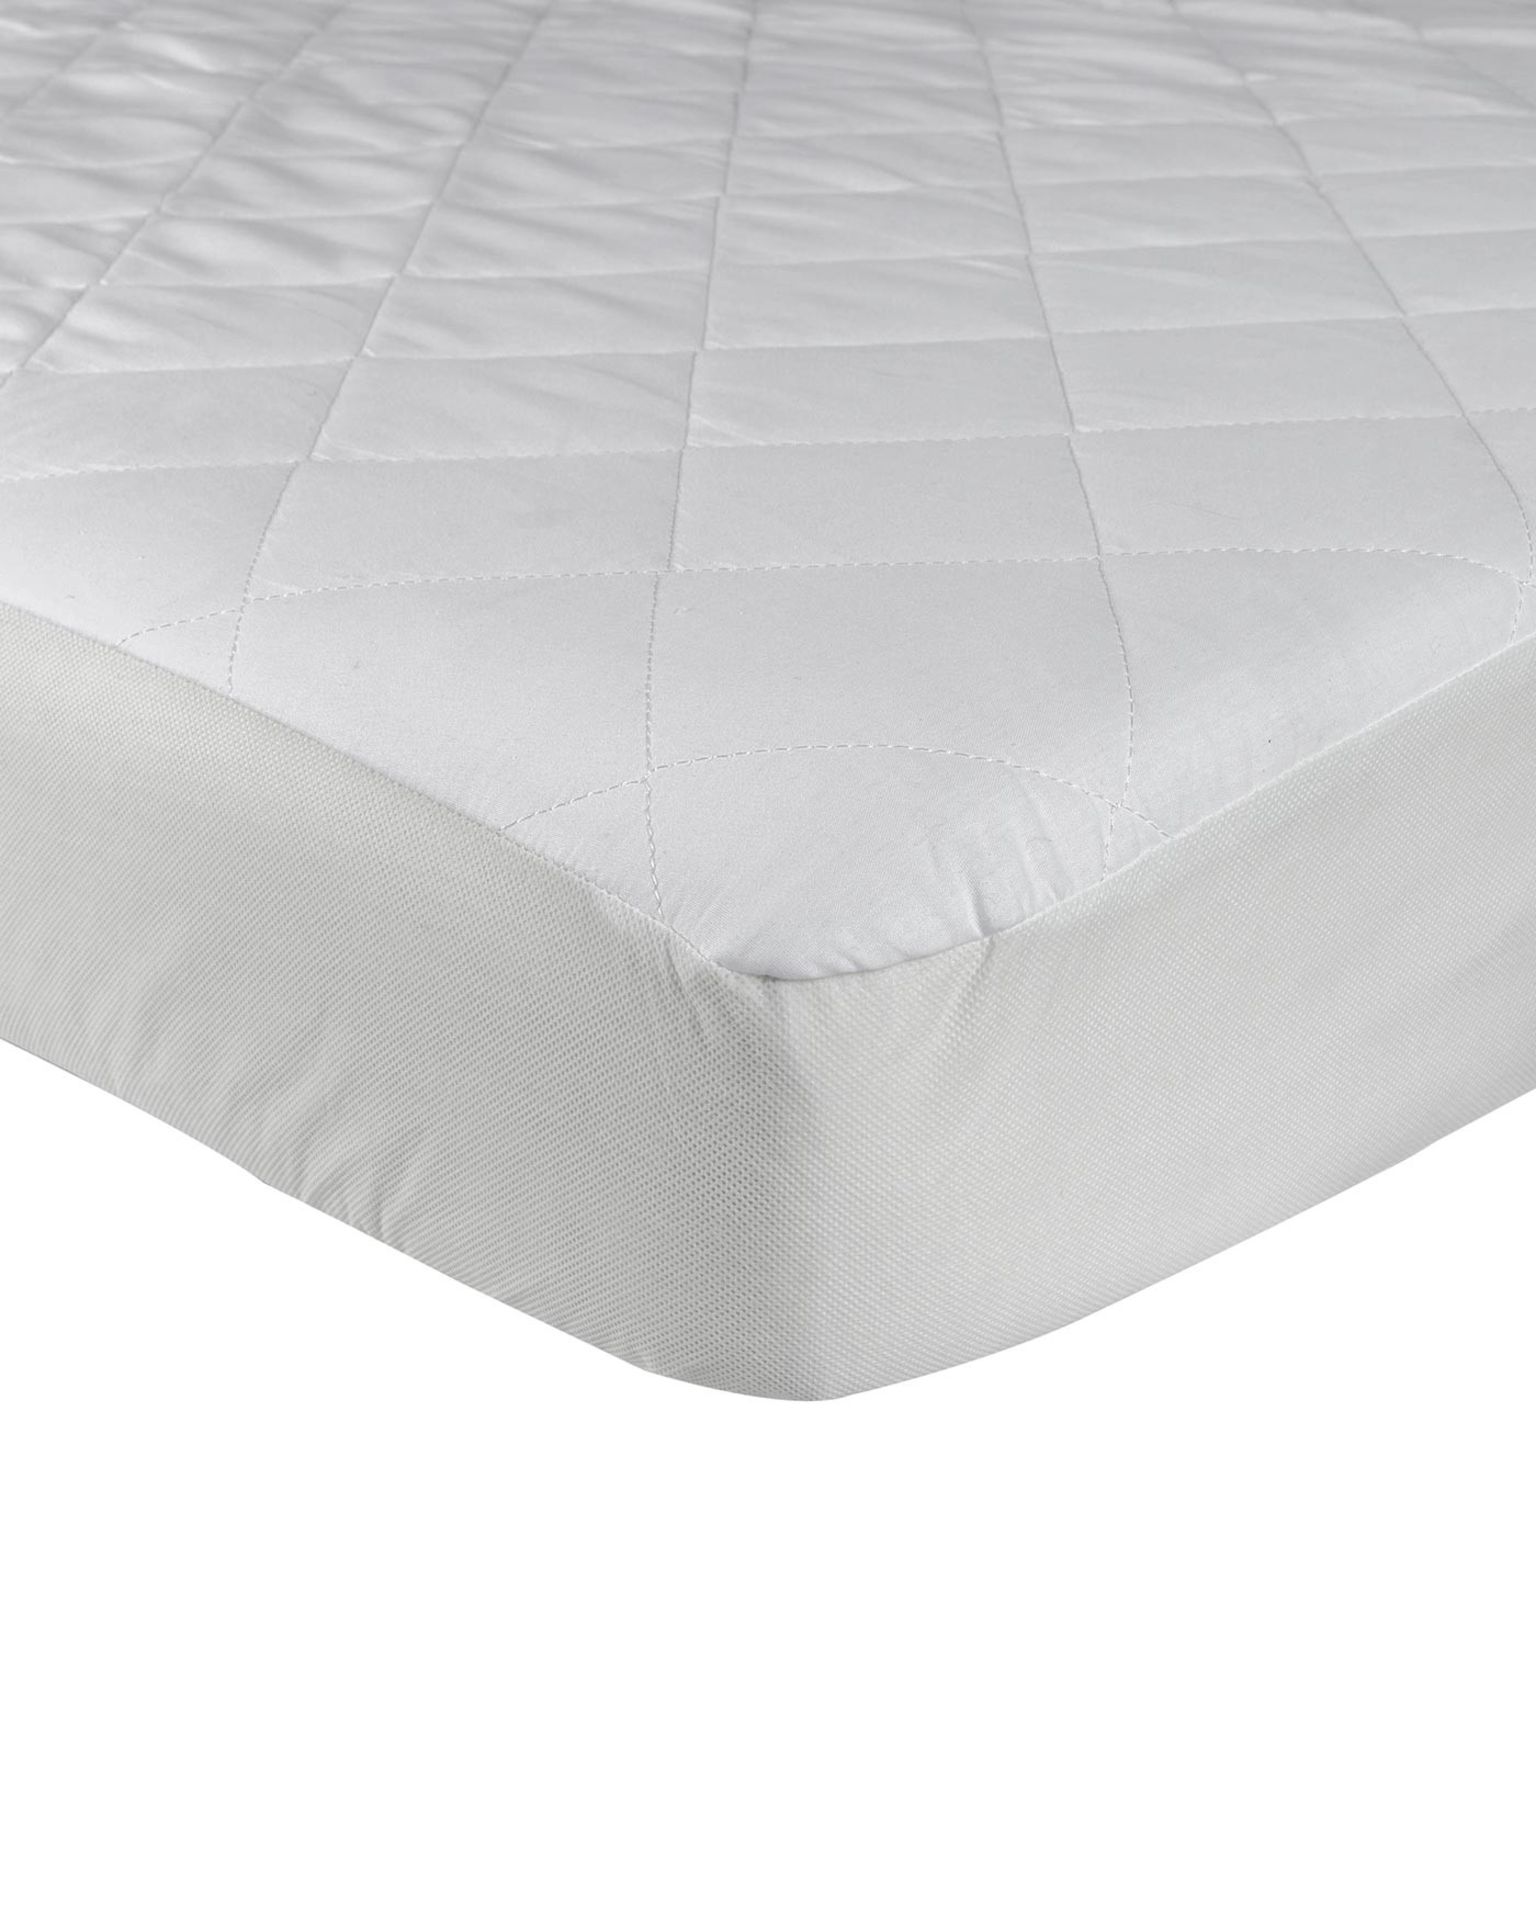 Brand New 137x190+33cm Double Luxury Quilted Fitted Extra Deep Mattress Protector